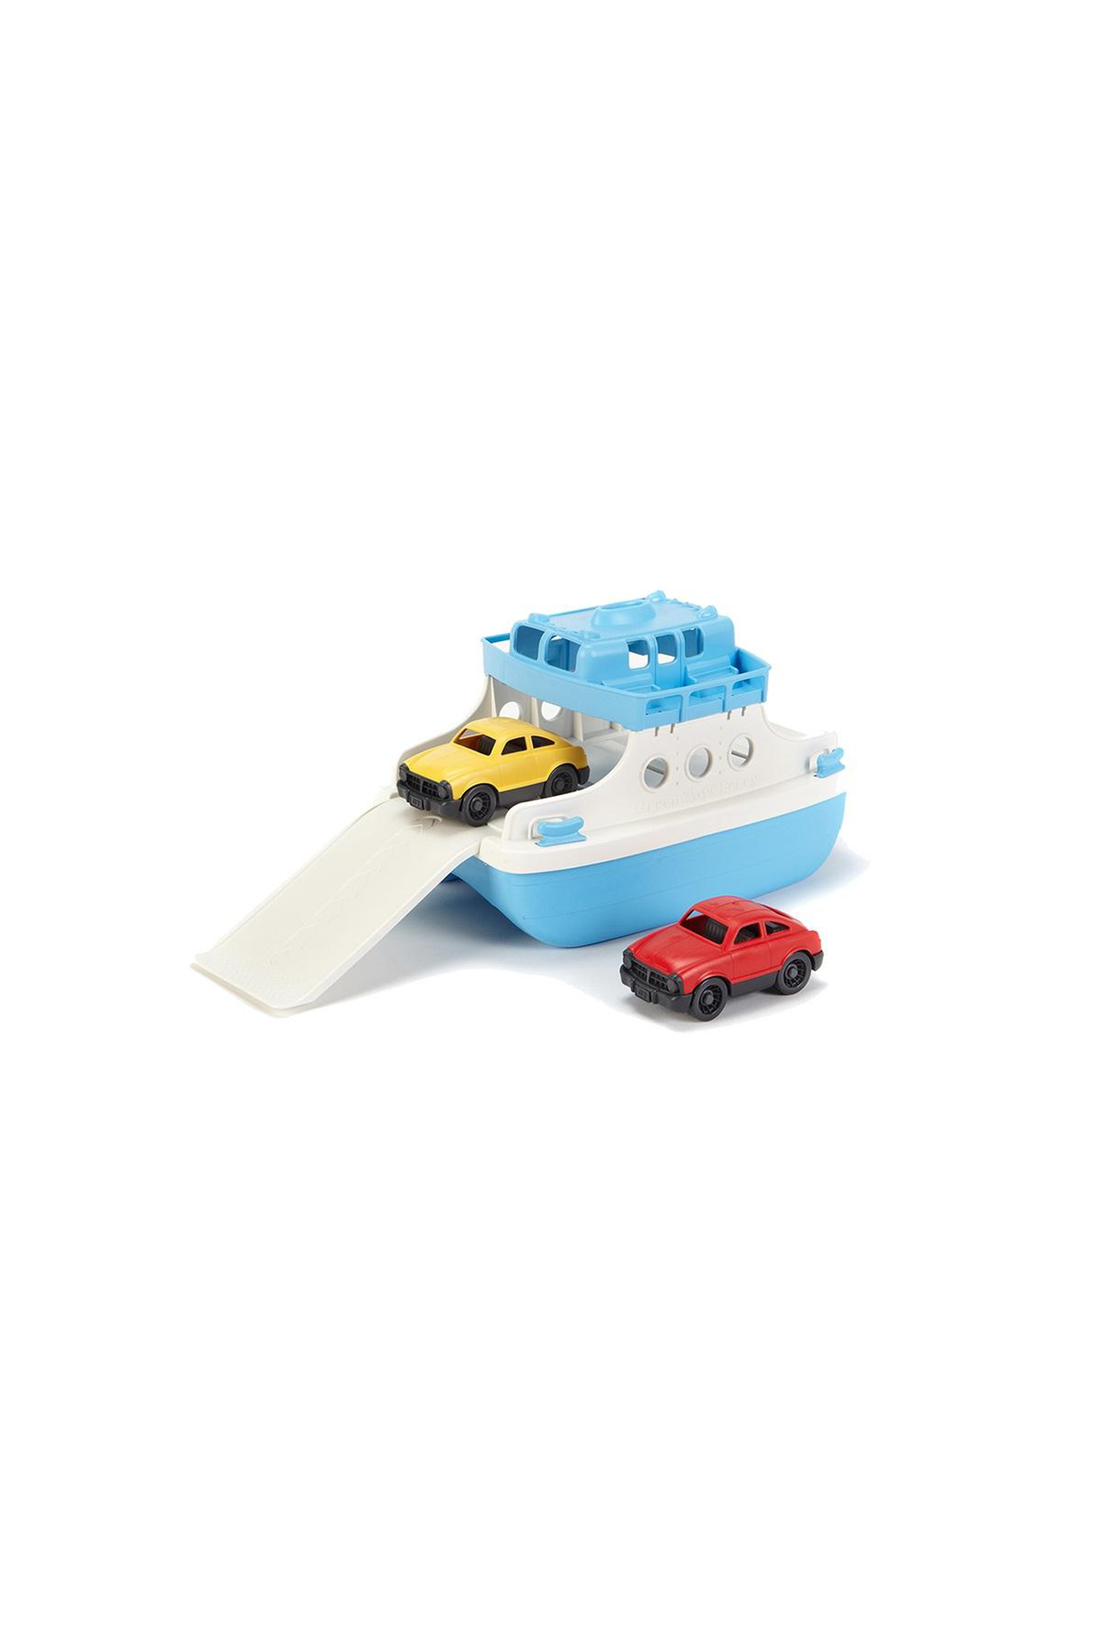 GREEN TOYS FERRY BOAT WITH FASTBACKS - Sea Apple